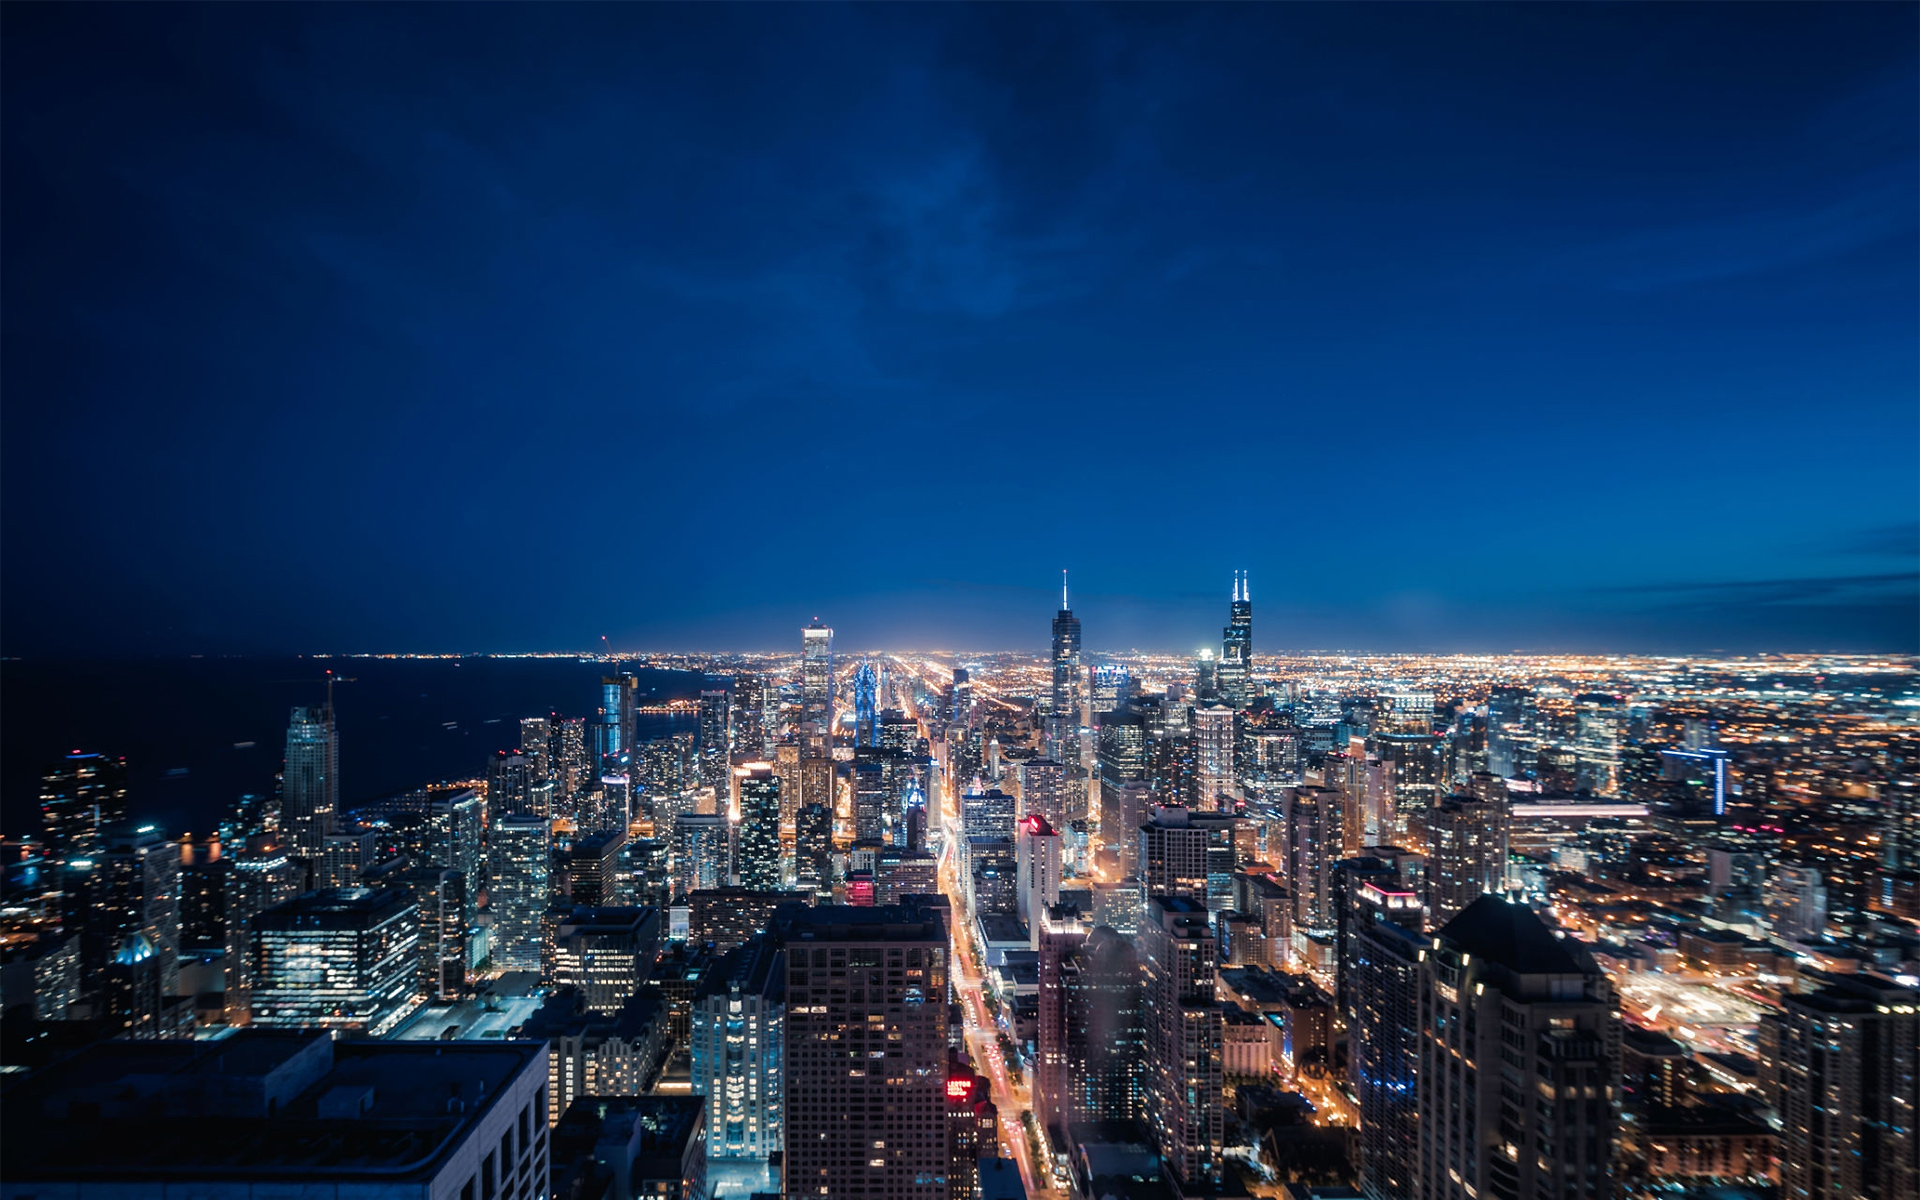 https://tramcooperativa.it/wp-content/uploads/2021/01/1160442138-Aerial-View-of-Chicago-cityscape-skyline-at-Night.jpg